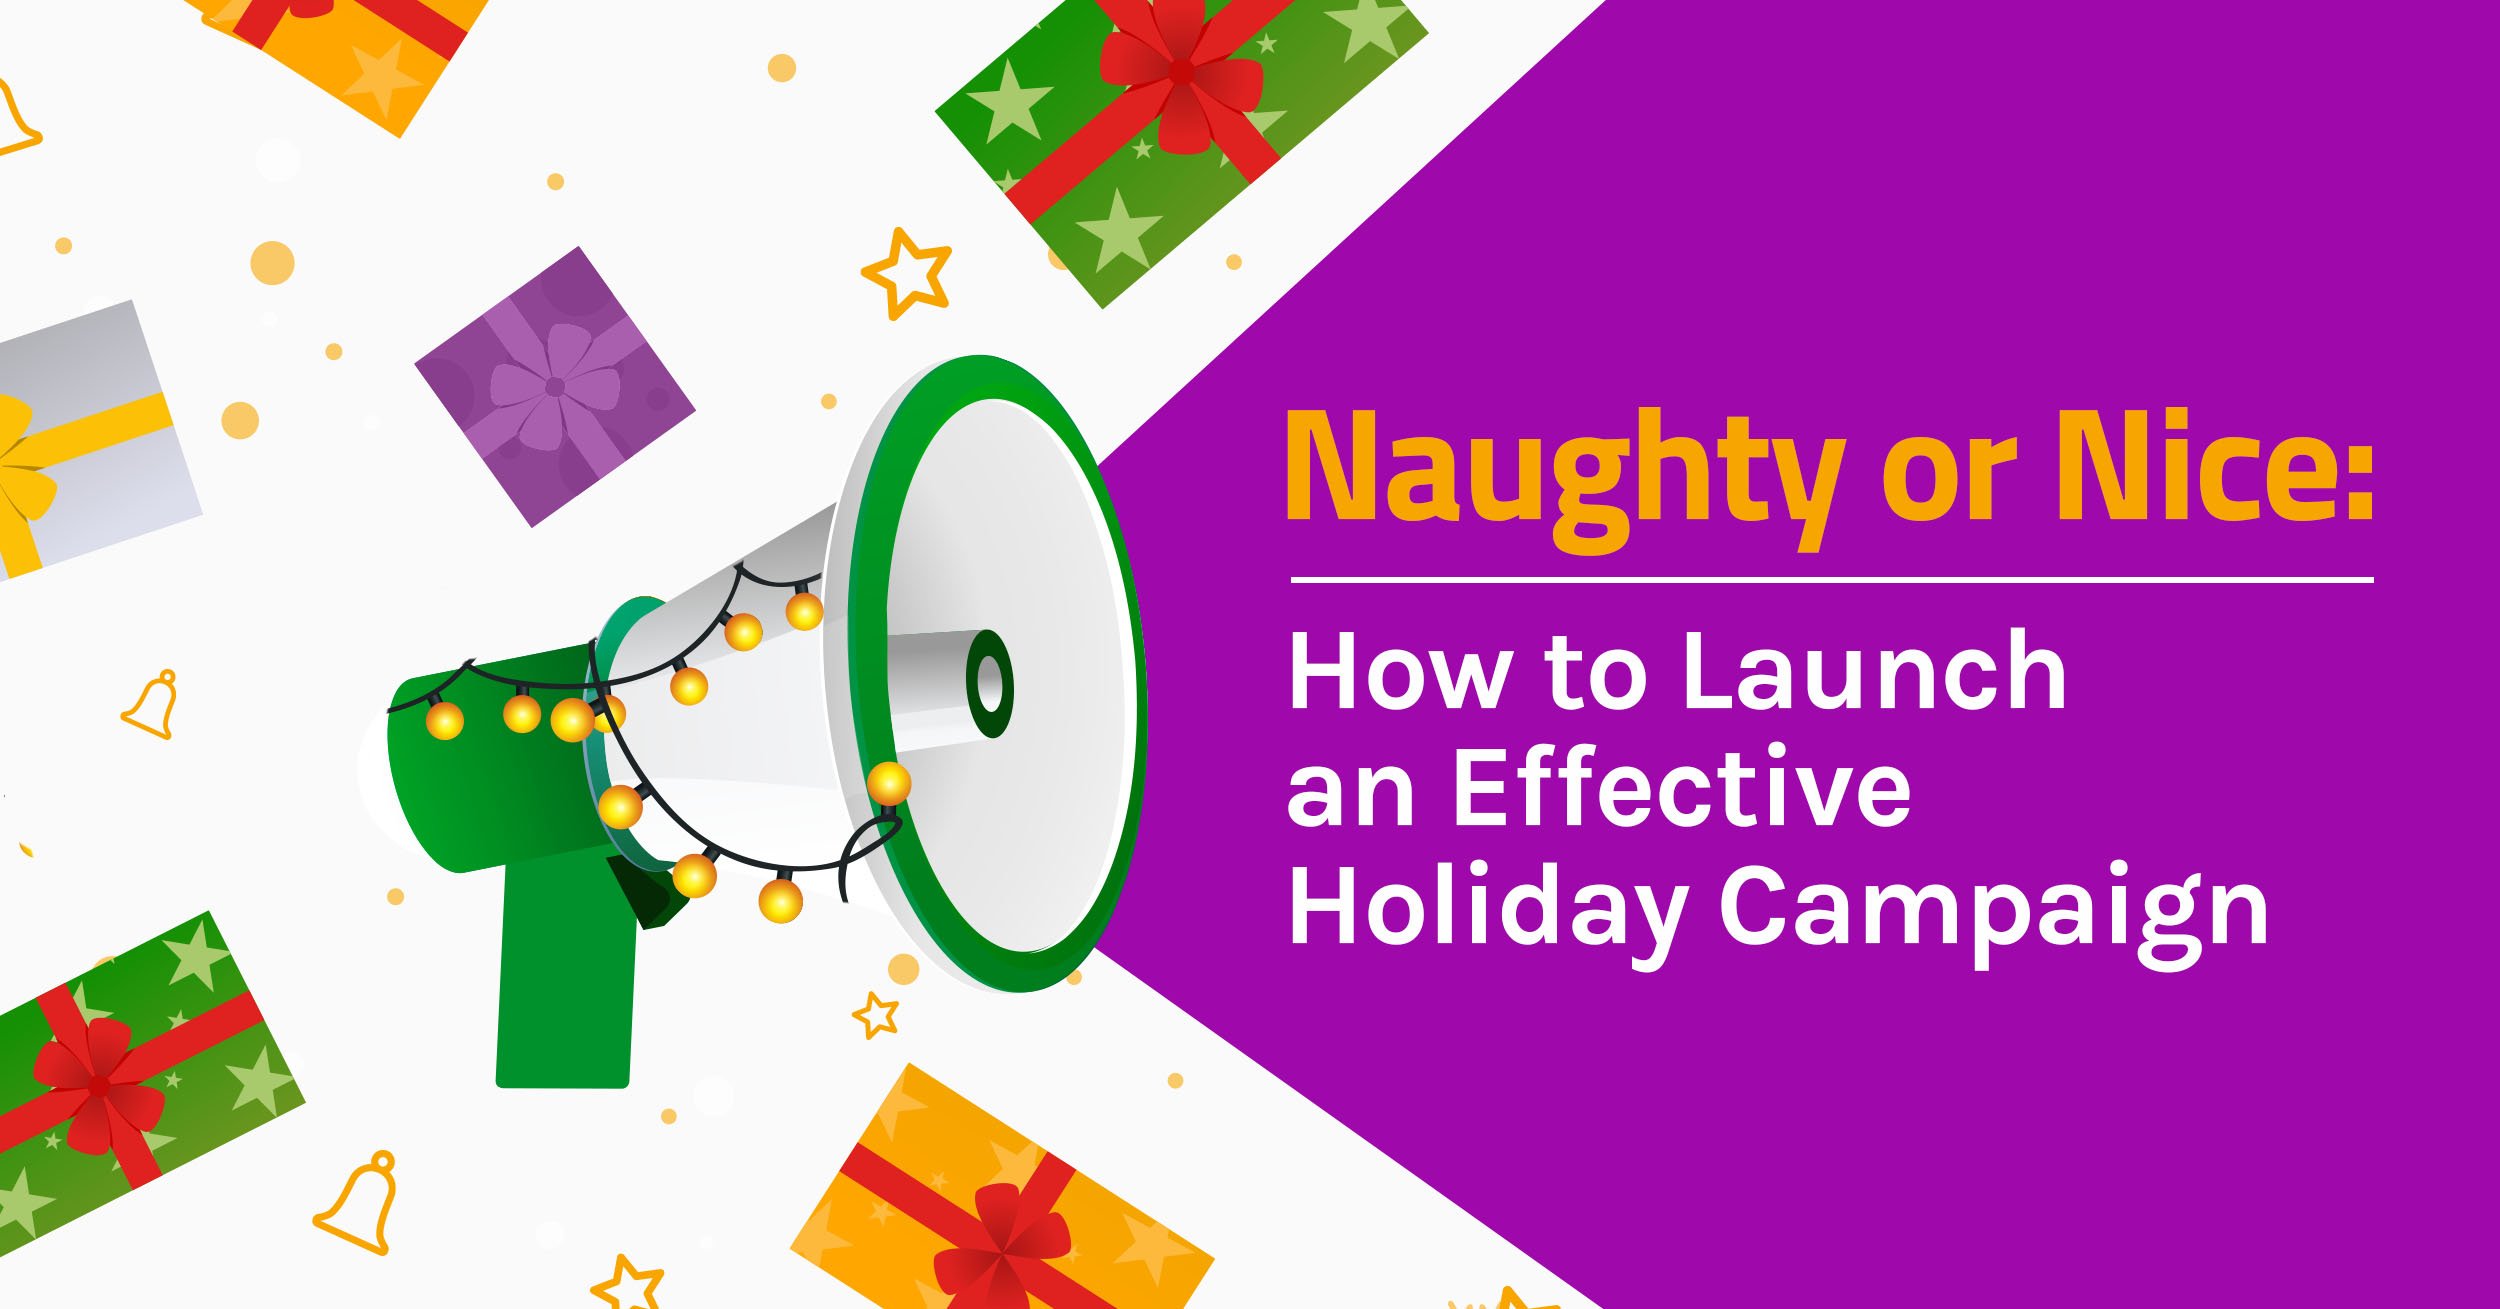 How to Launch an Effective Holiday Campaign